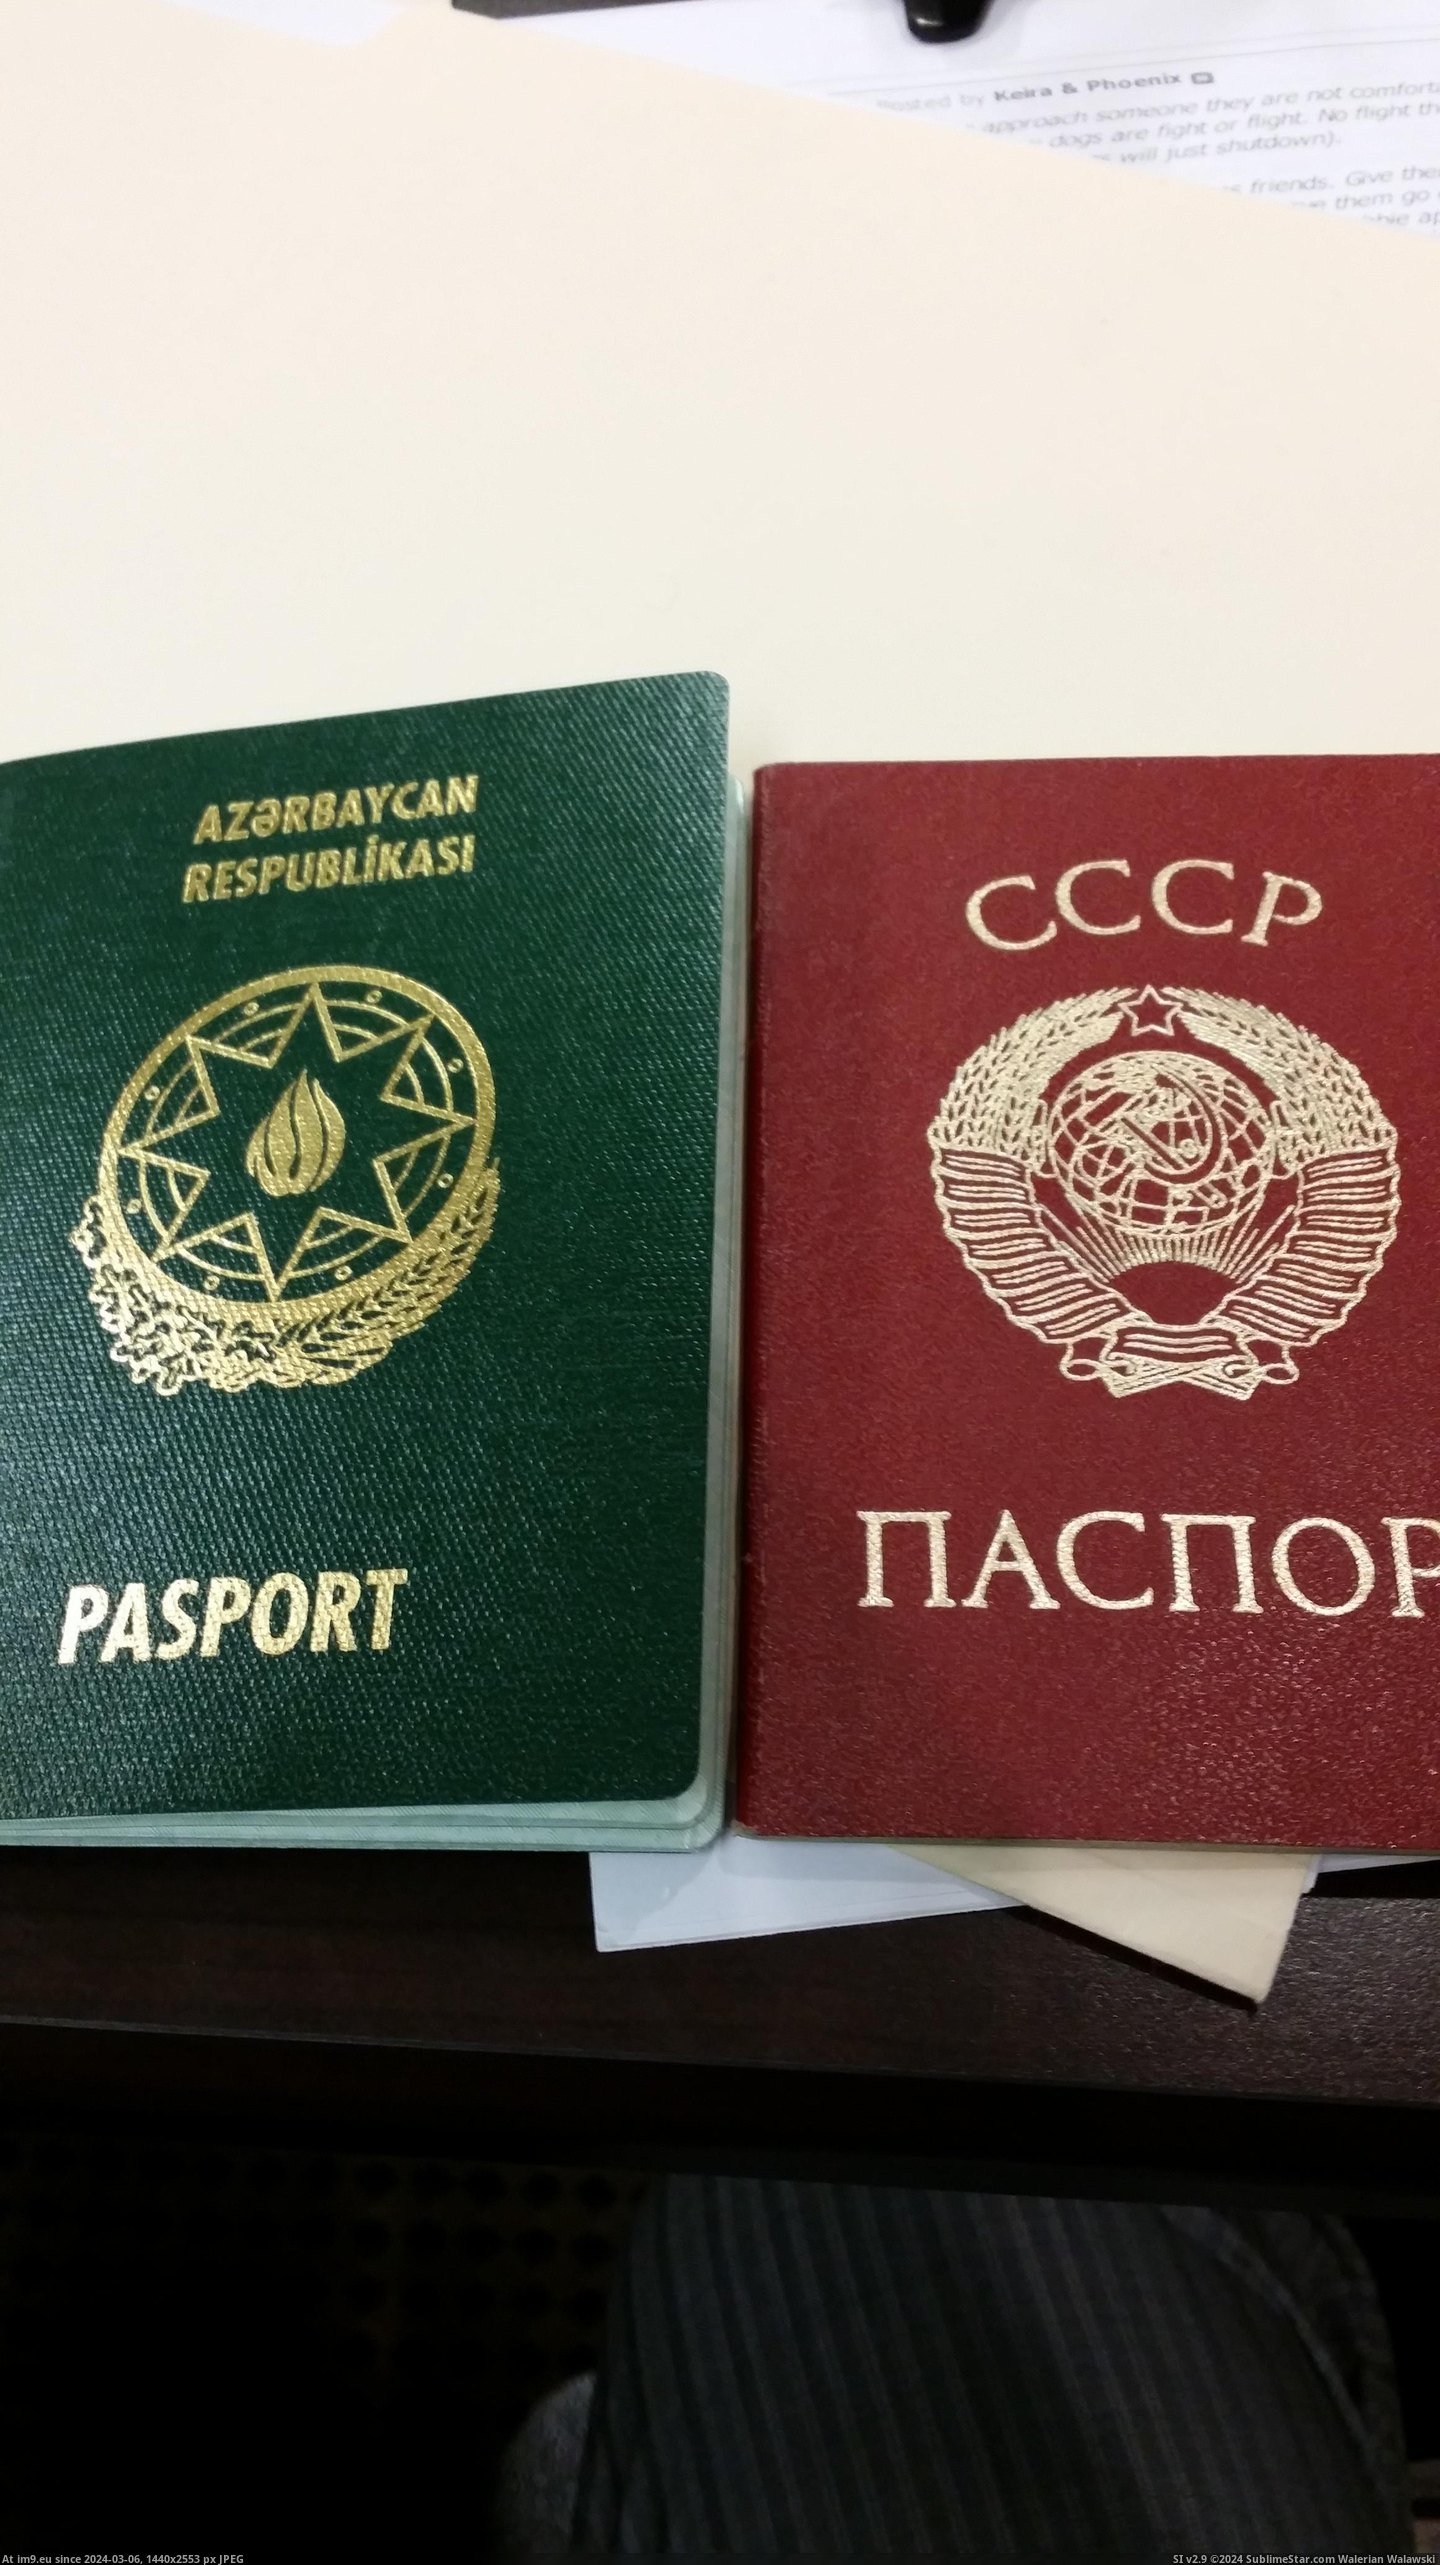 #Time #Long #Guess #Passport #Did #Updated [Pics] Just updated my passport. Guess you can say it's been a long time since I last did Pic. (Image of album My r/PICS favs))